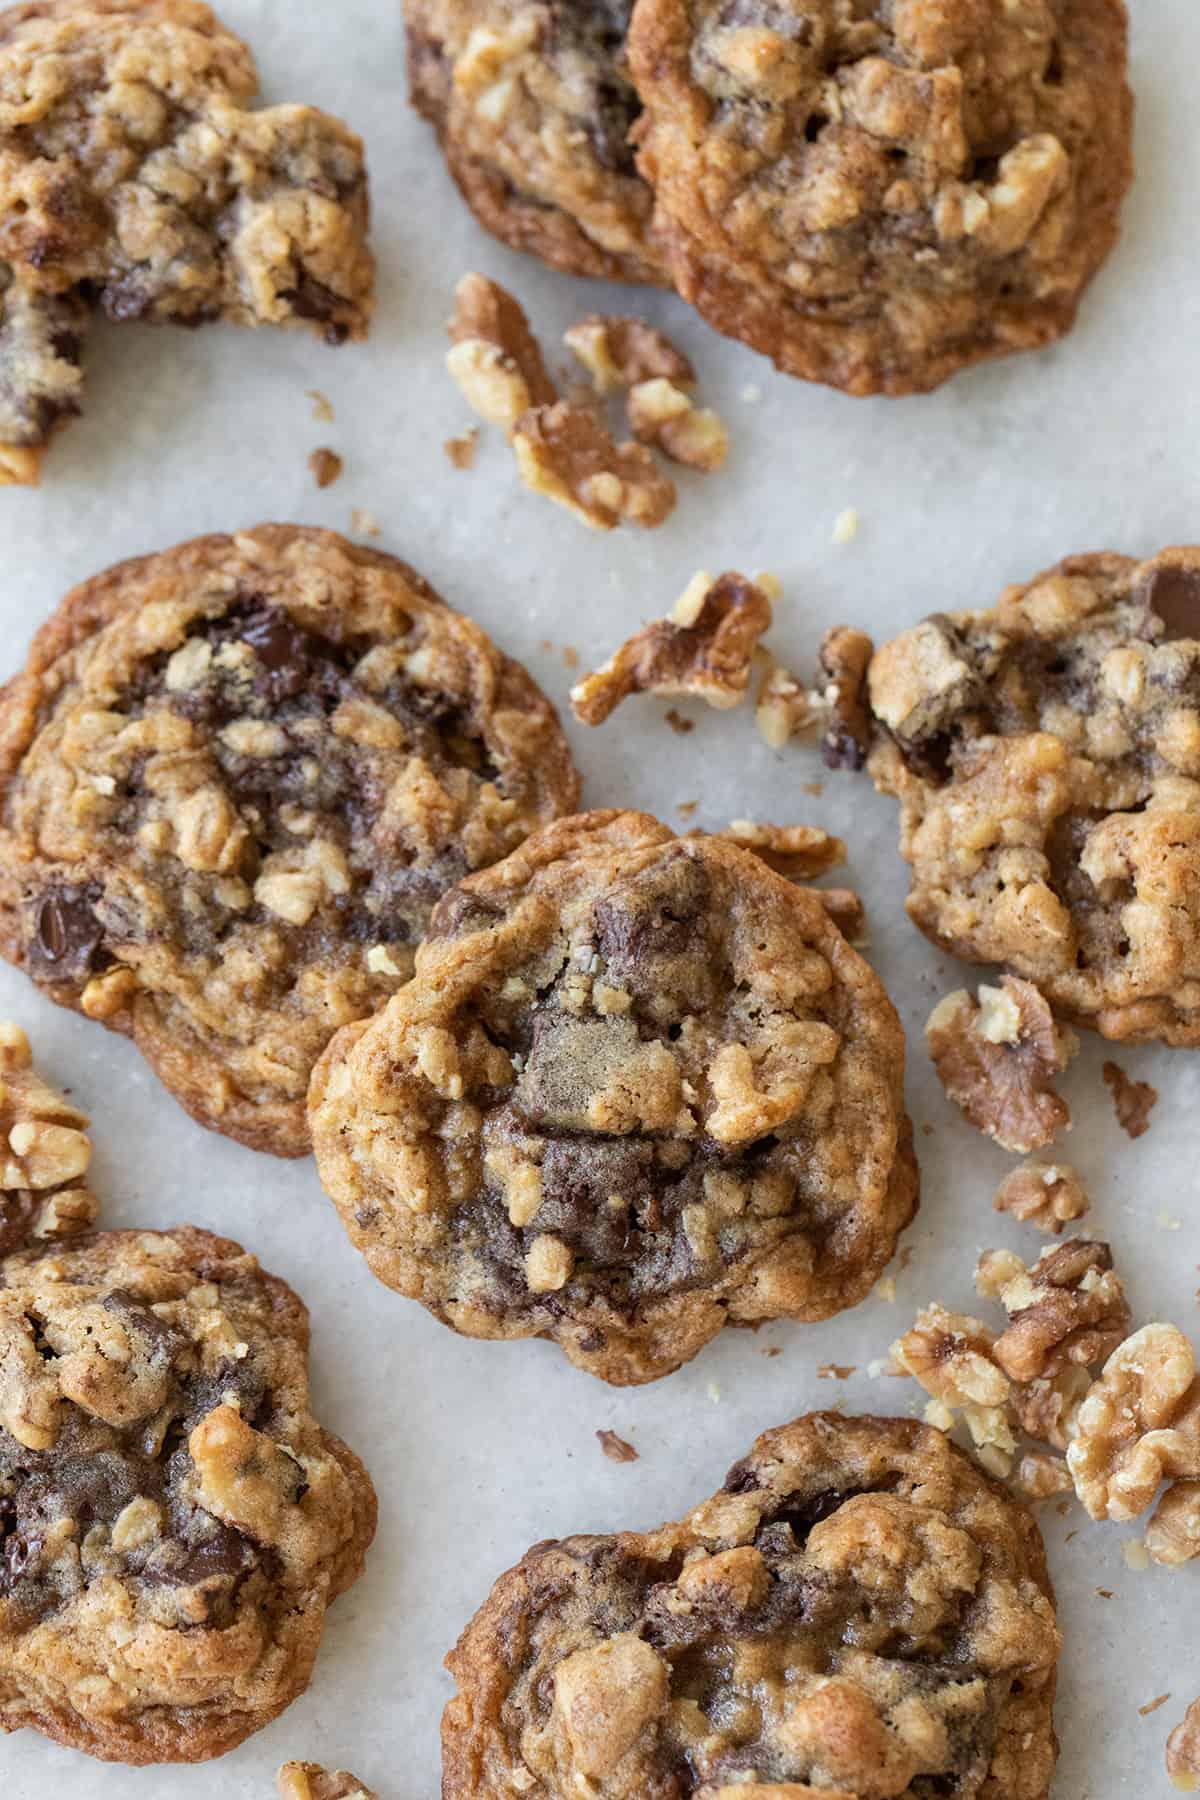 Fresh baked cookies with walnuts and chocolate chips.